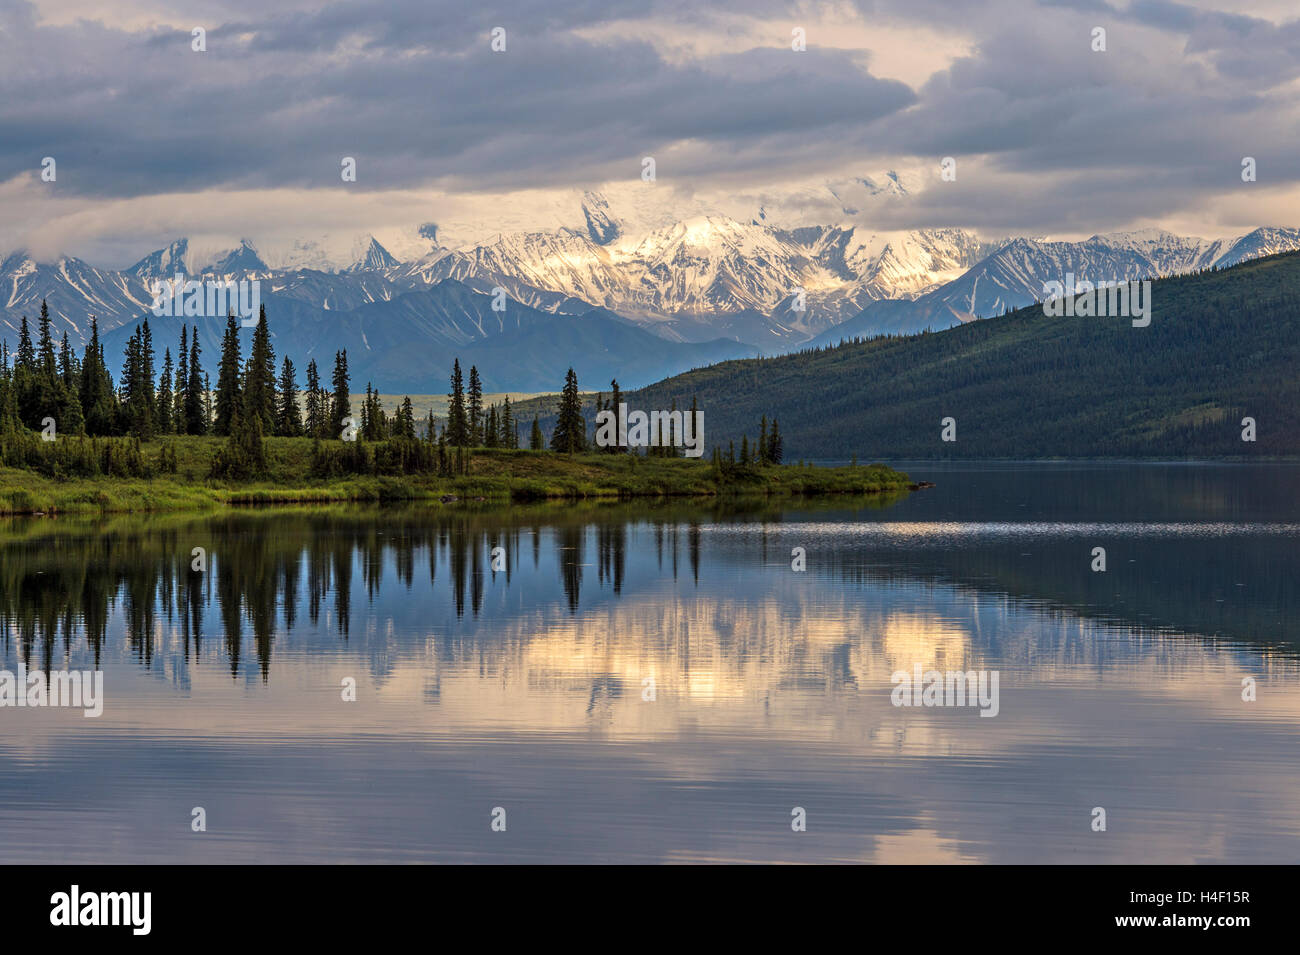 Reflection pond with Denali (Mt. McKinley) mountains in the background, Denali National Park, Alaska Stock Photo